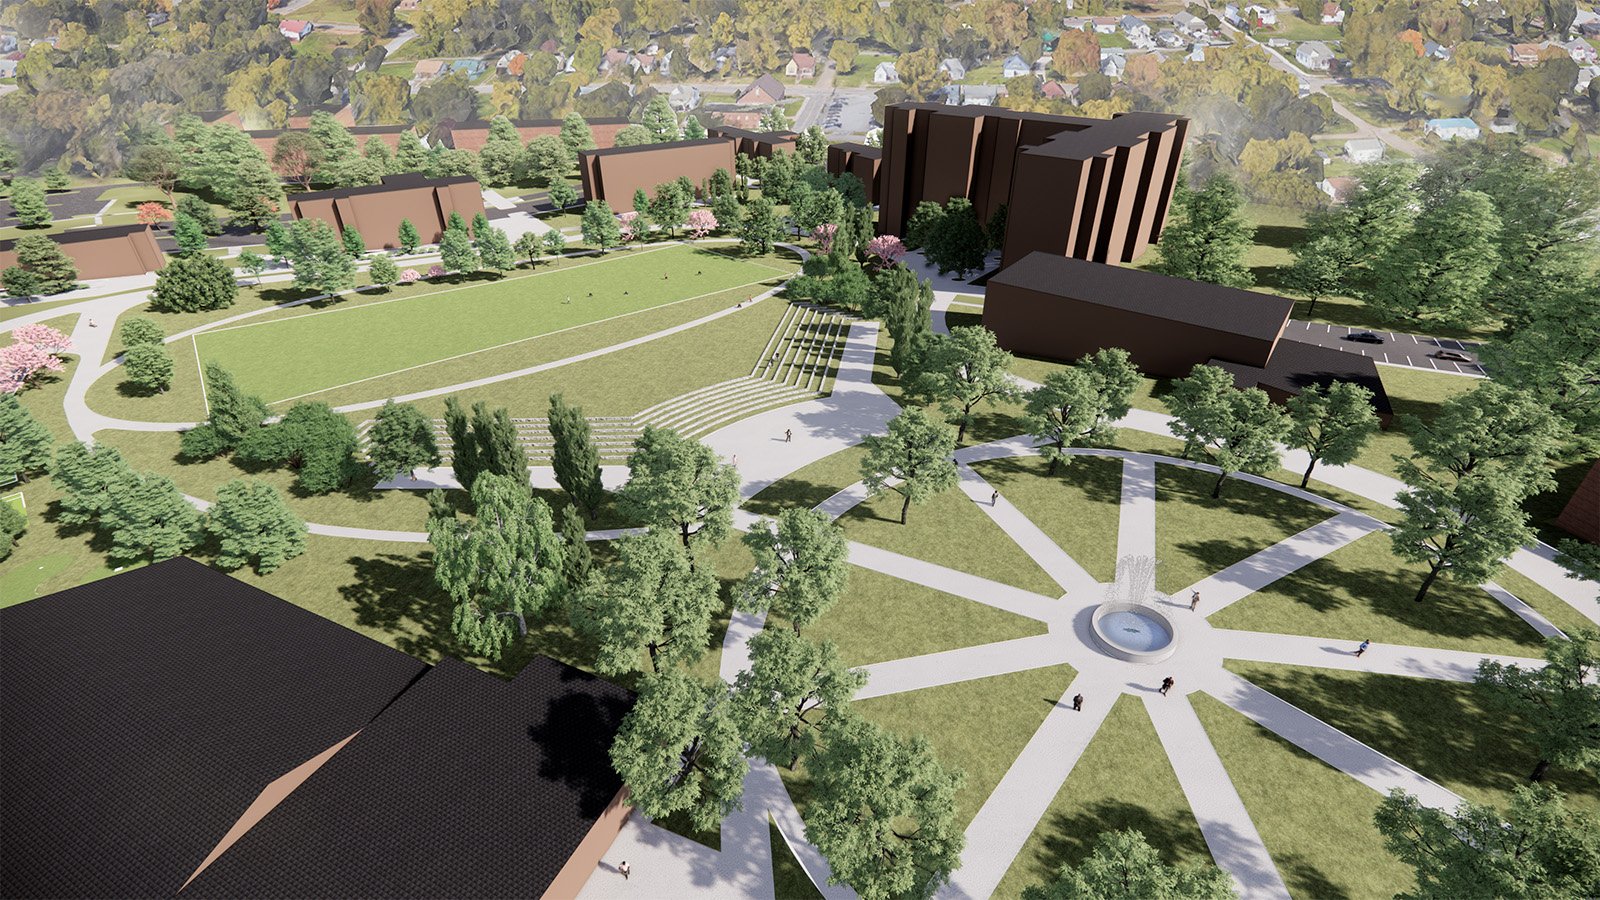 MHM - Knoxville College Aerial 4.jpg